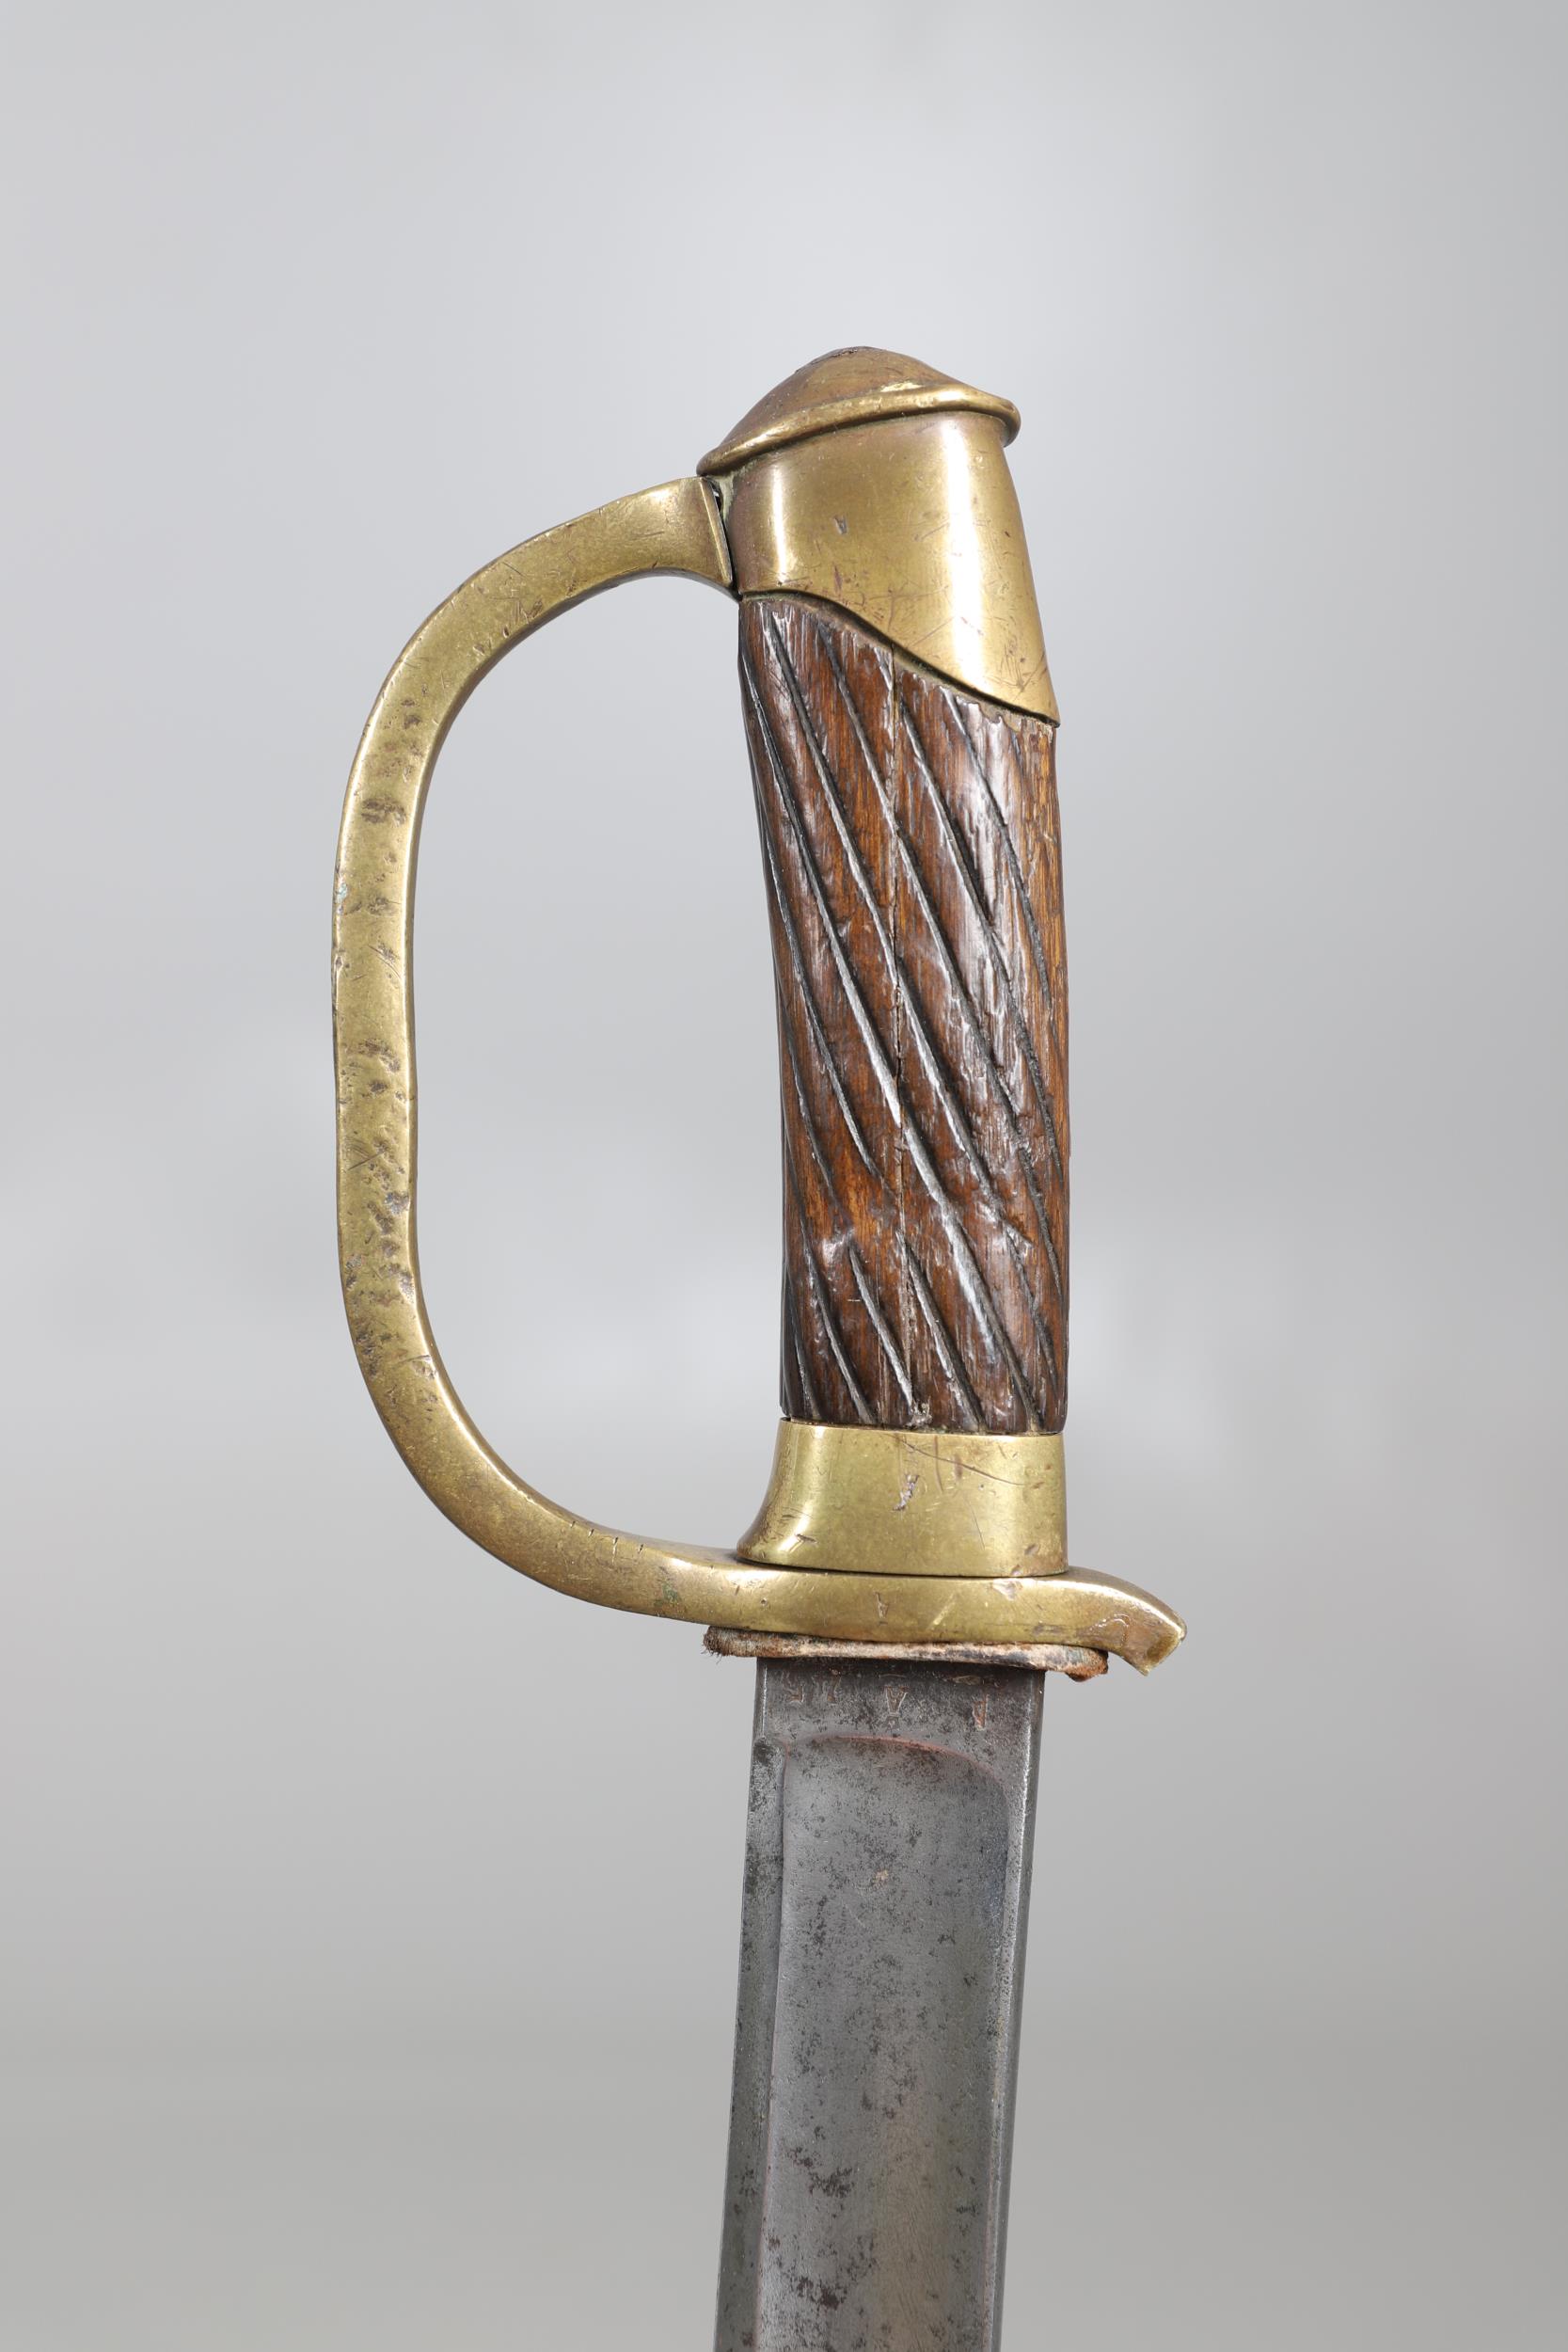 A FIRST WORLD WAR RUSSIAN 1881 PATTERN CAVALRY TROOPER'S SWORD AND SCABBARD. - Image 13 of 13